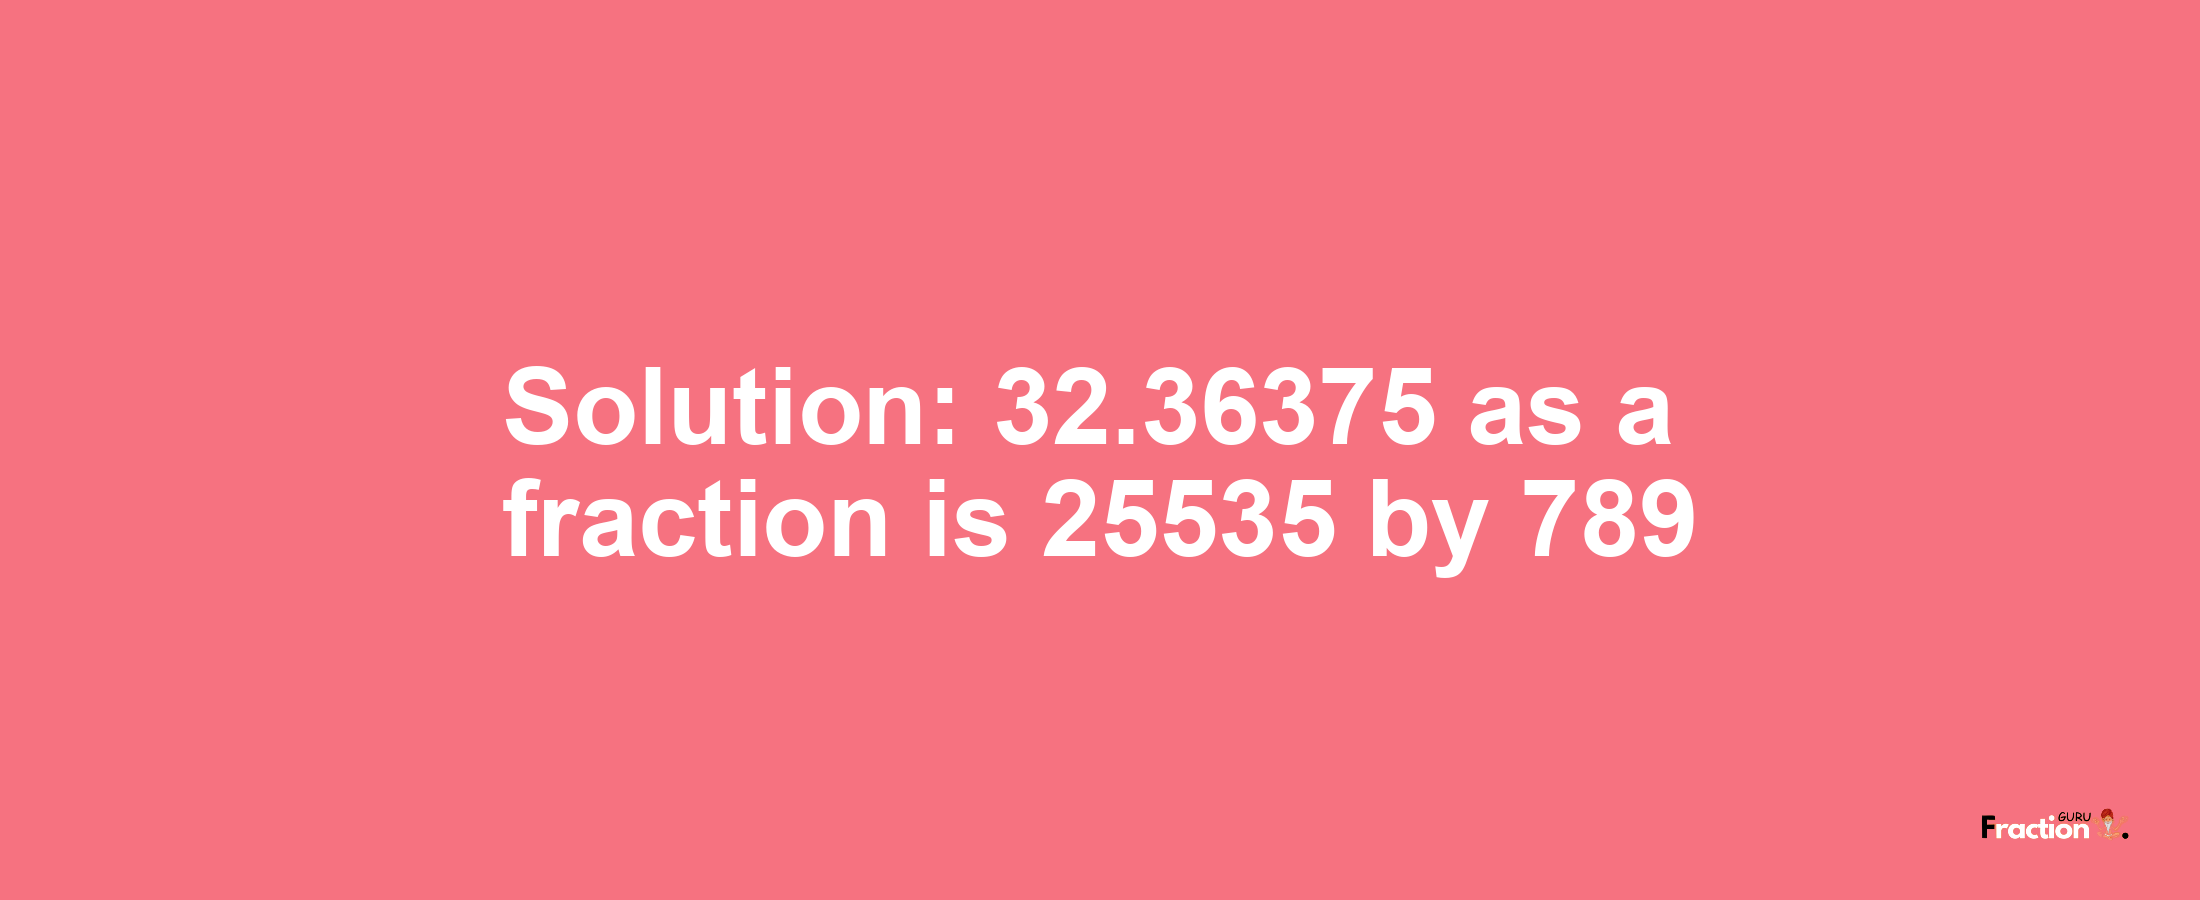 Solution:32.36375 as a fraction is 25535/789